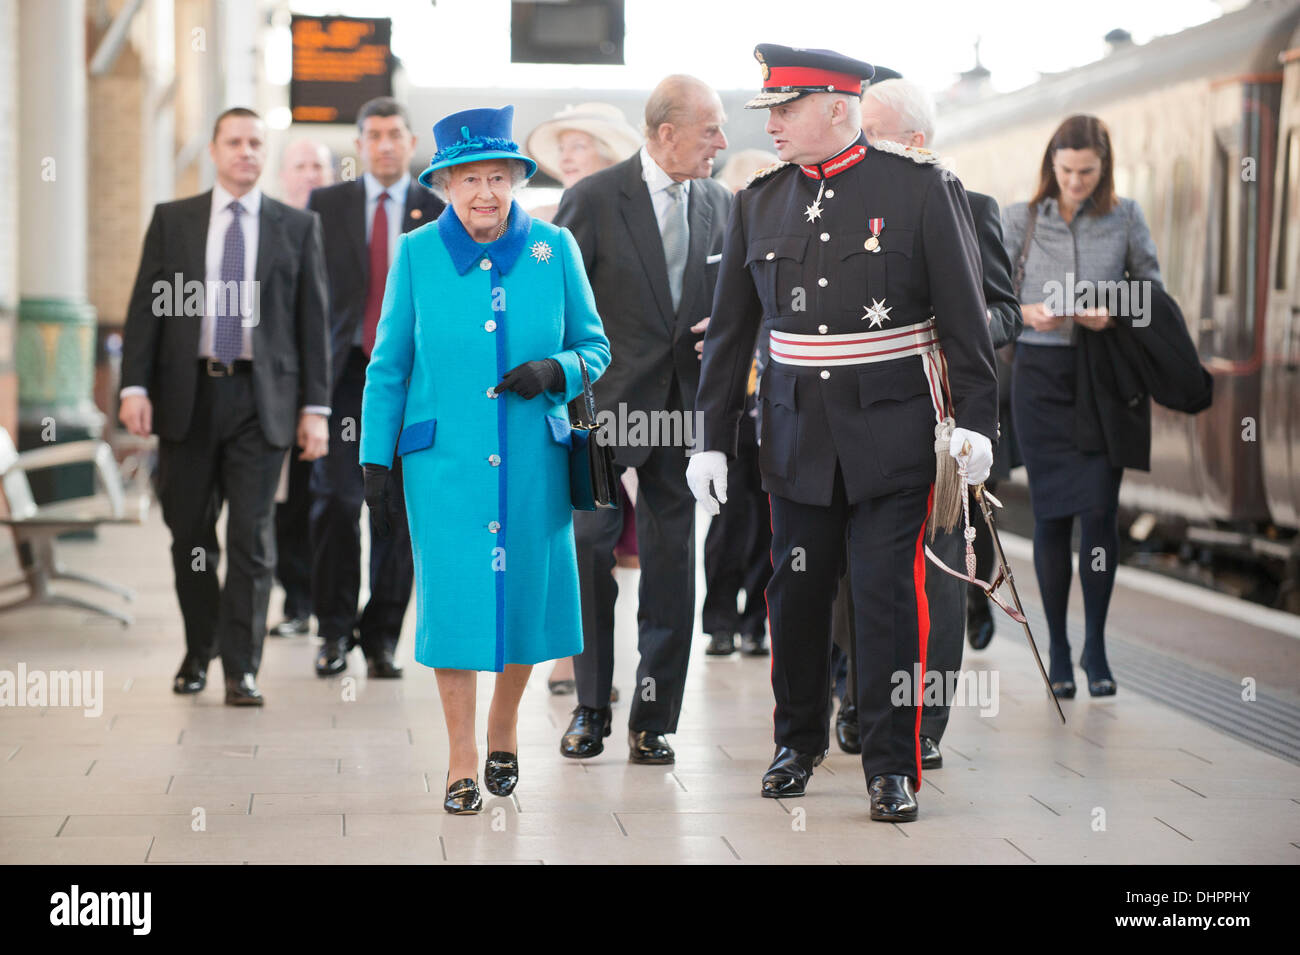 Manchester, UK. 14th November, 2013. Queen Elizabeth II and Prince Philip, Duke of Edinburgh arrive at Piccadilly Train Station in Manchester, greeted by Mr Warren J. Smith, The Lord-Lieutenant of Greater Manchester, ahead of their engagement to officially open the new 'Noma' Co-Op building in the city. Credit:  Russell Hart/Alamy Live News (Editorial use only). Stock Photo